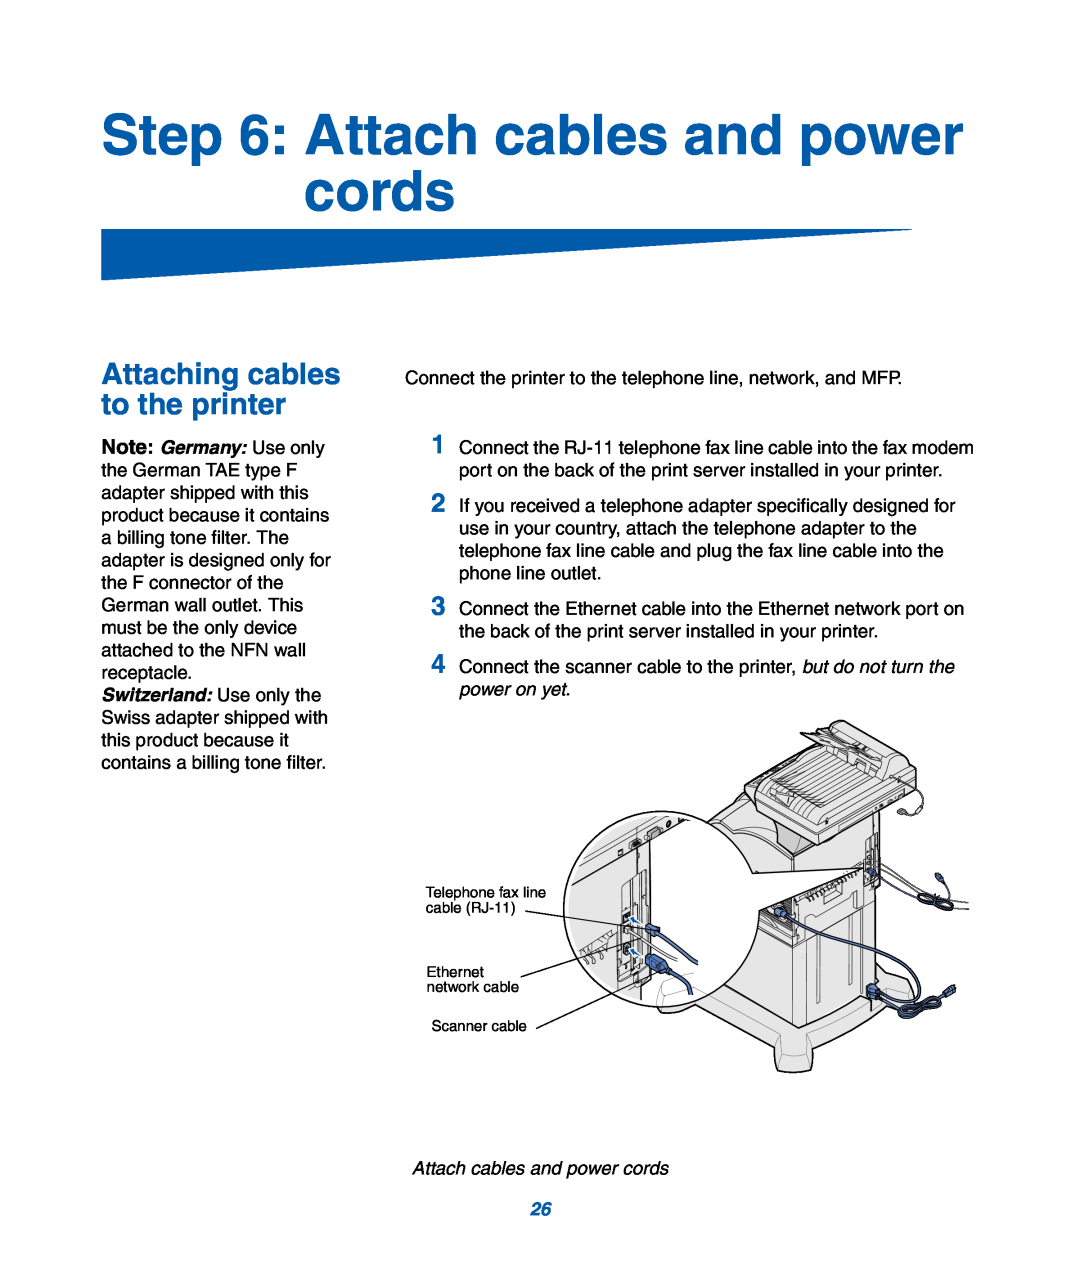 IBM M22 MFP manual Attach cables and power cords, Attaching cables to the printer 